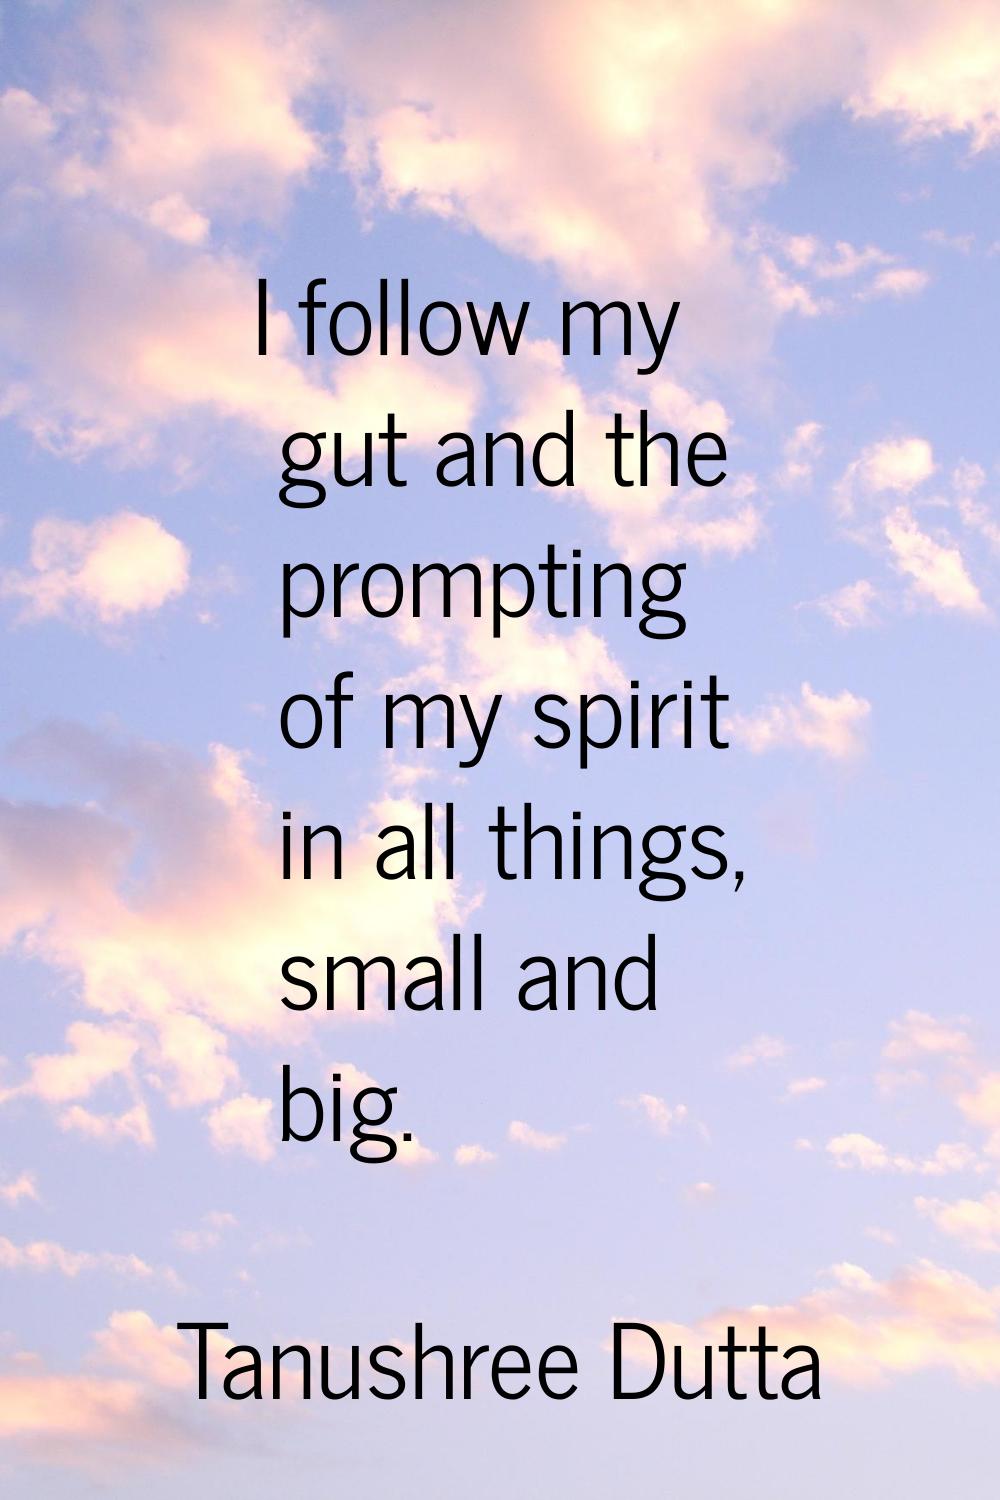 I follow my gut and the prompting of my spirit in all things, small and big.